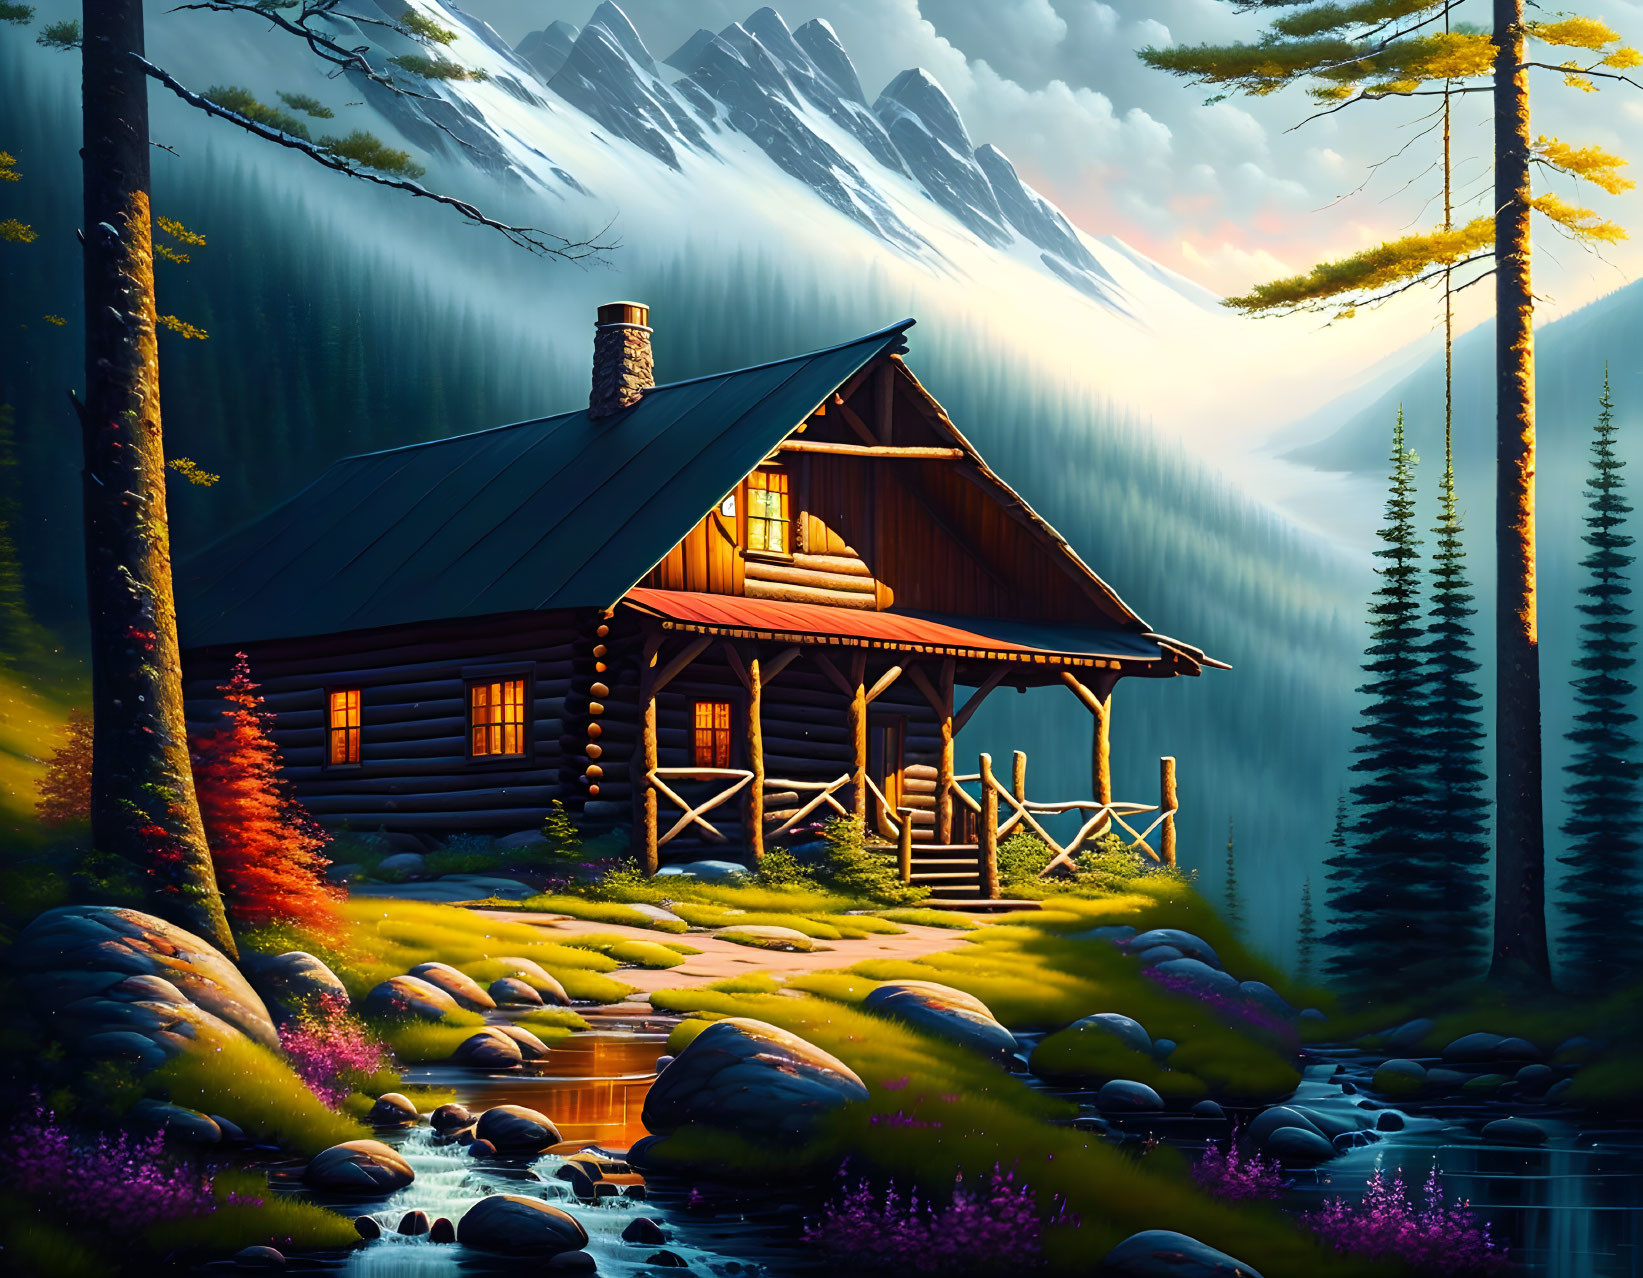 Rustic log cabin by tranquil stream at twilight